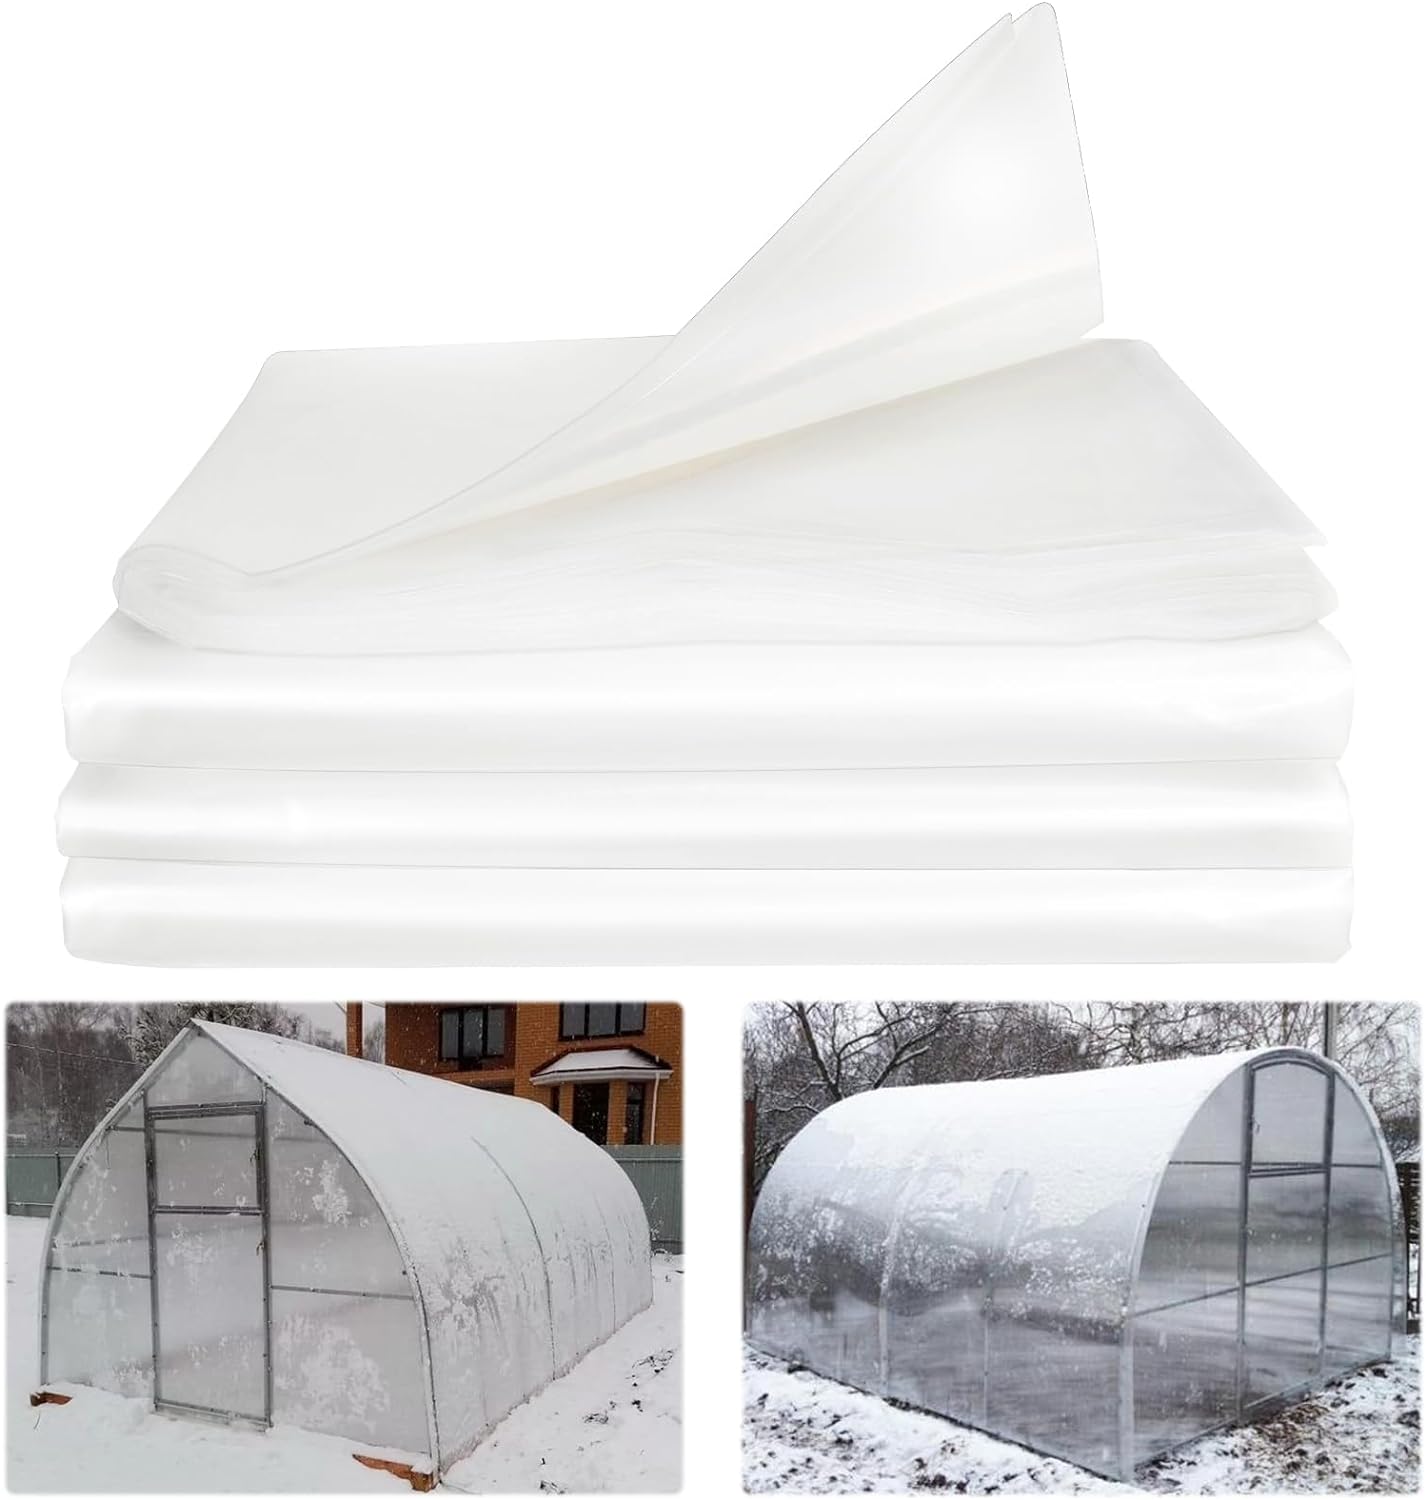 RGQSUN 10x26 FT Clear Greenhouse Film Plastic Sheeting 6 mil Winter Hoop House Plastic Covering,Plant Covers Freeze Protection Blanket for Greenhouse Plants Windproof Frost Dust Proof